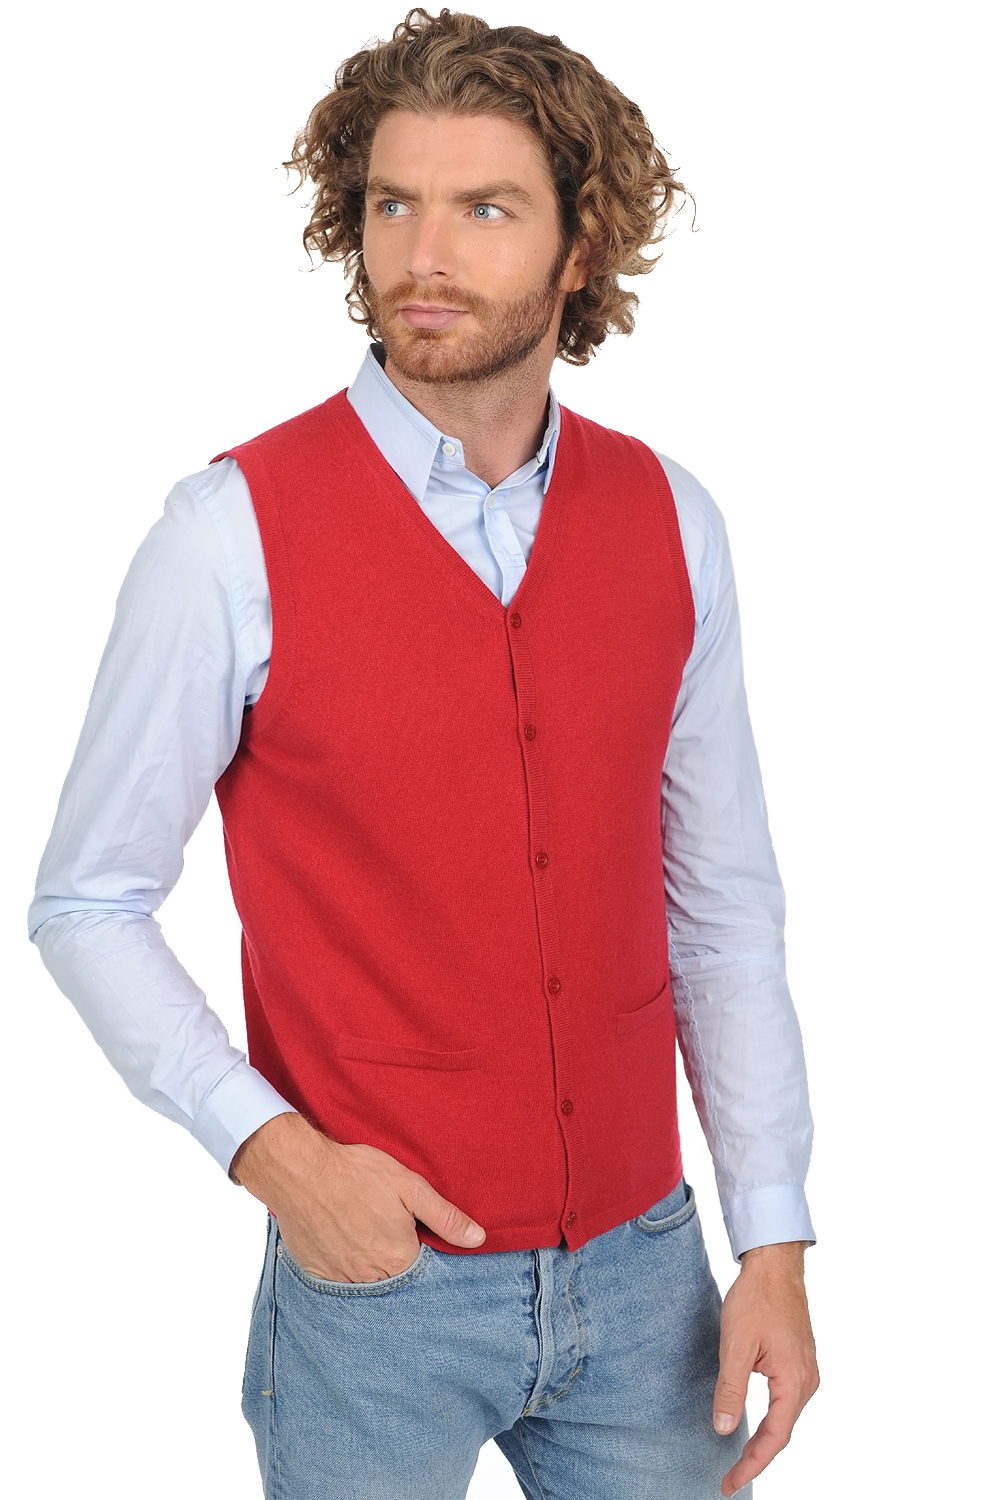 Cashmere men timeless classics basile blood red m